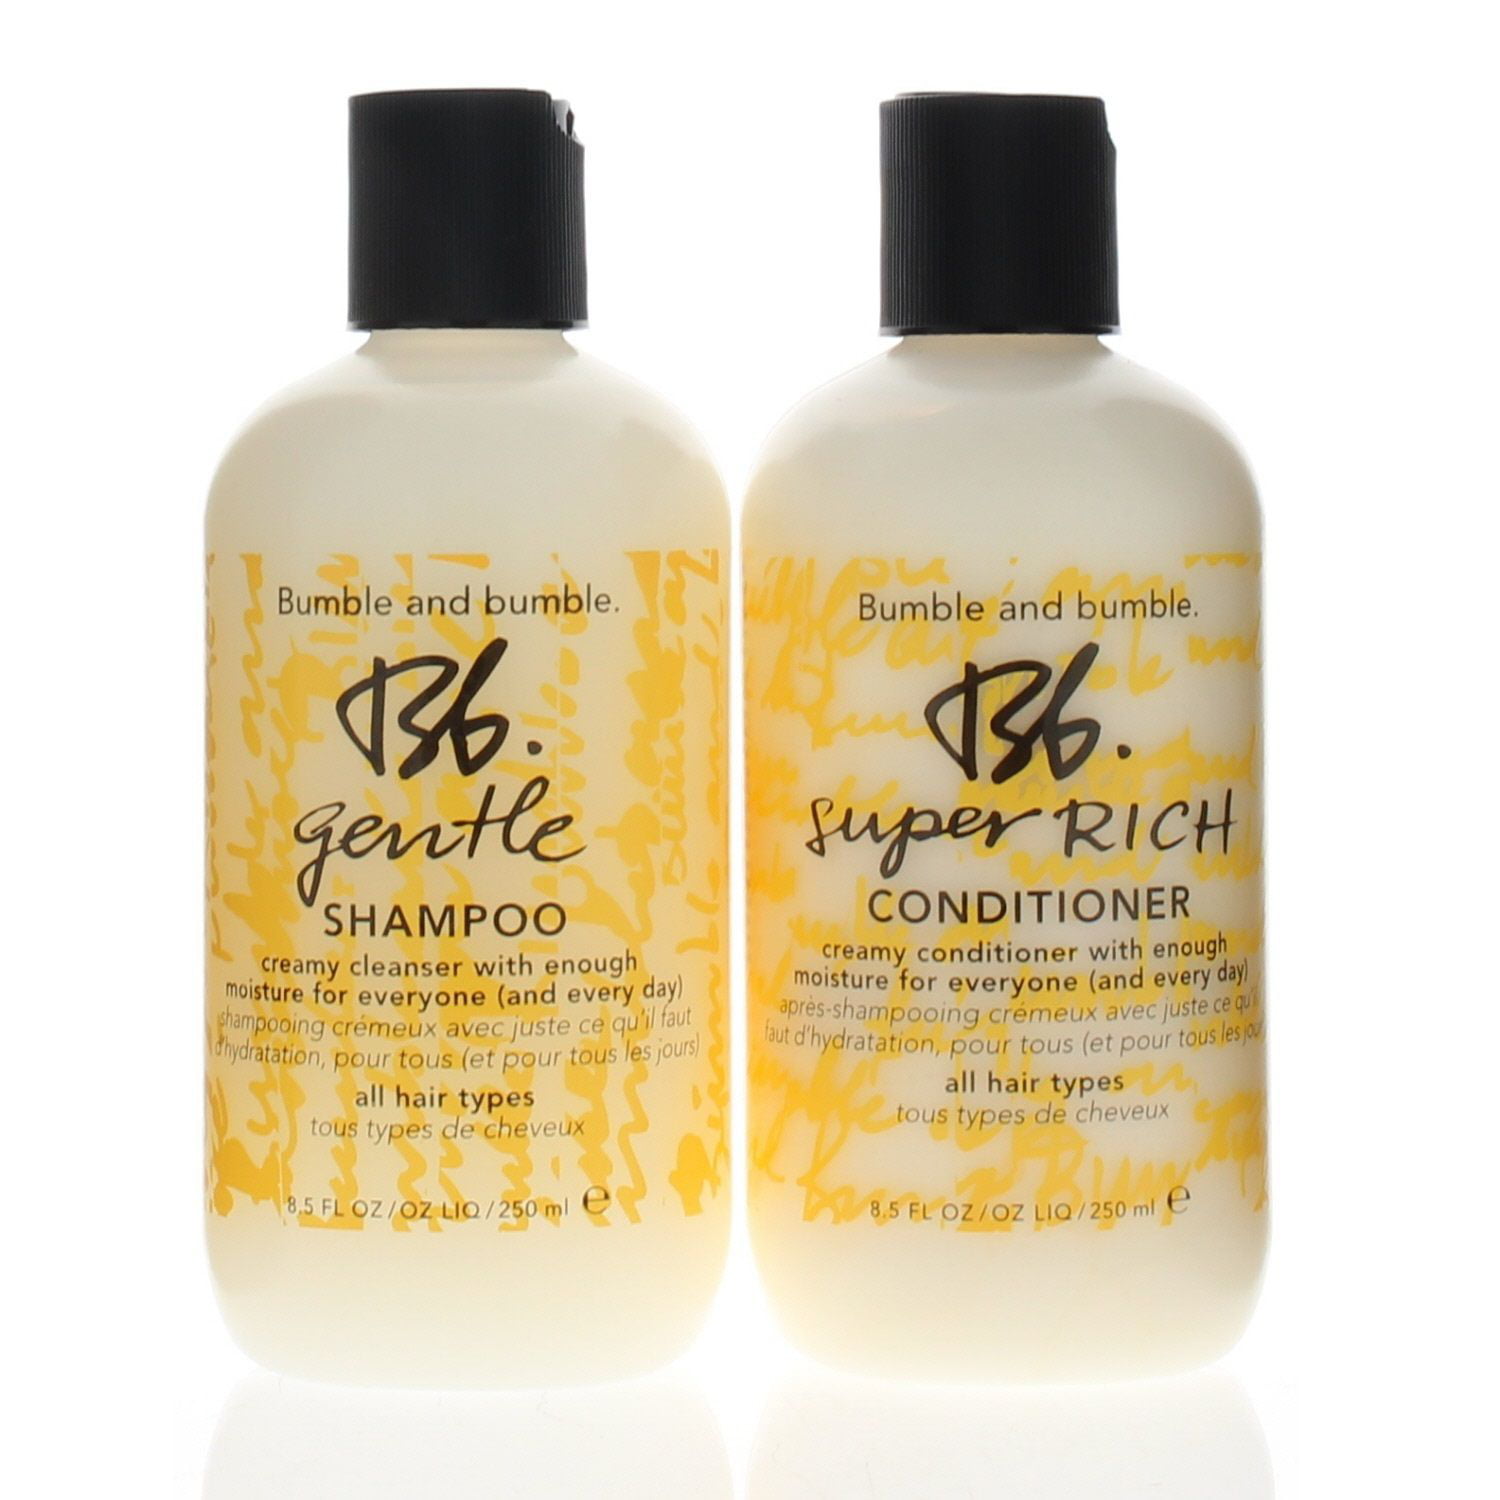 Bumble And Bumble Gentle Shampoo And Super Rich Conditioner 8 5oz Combo